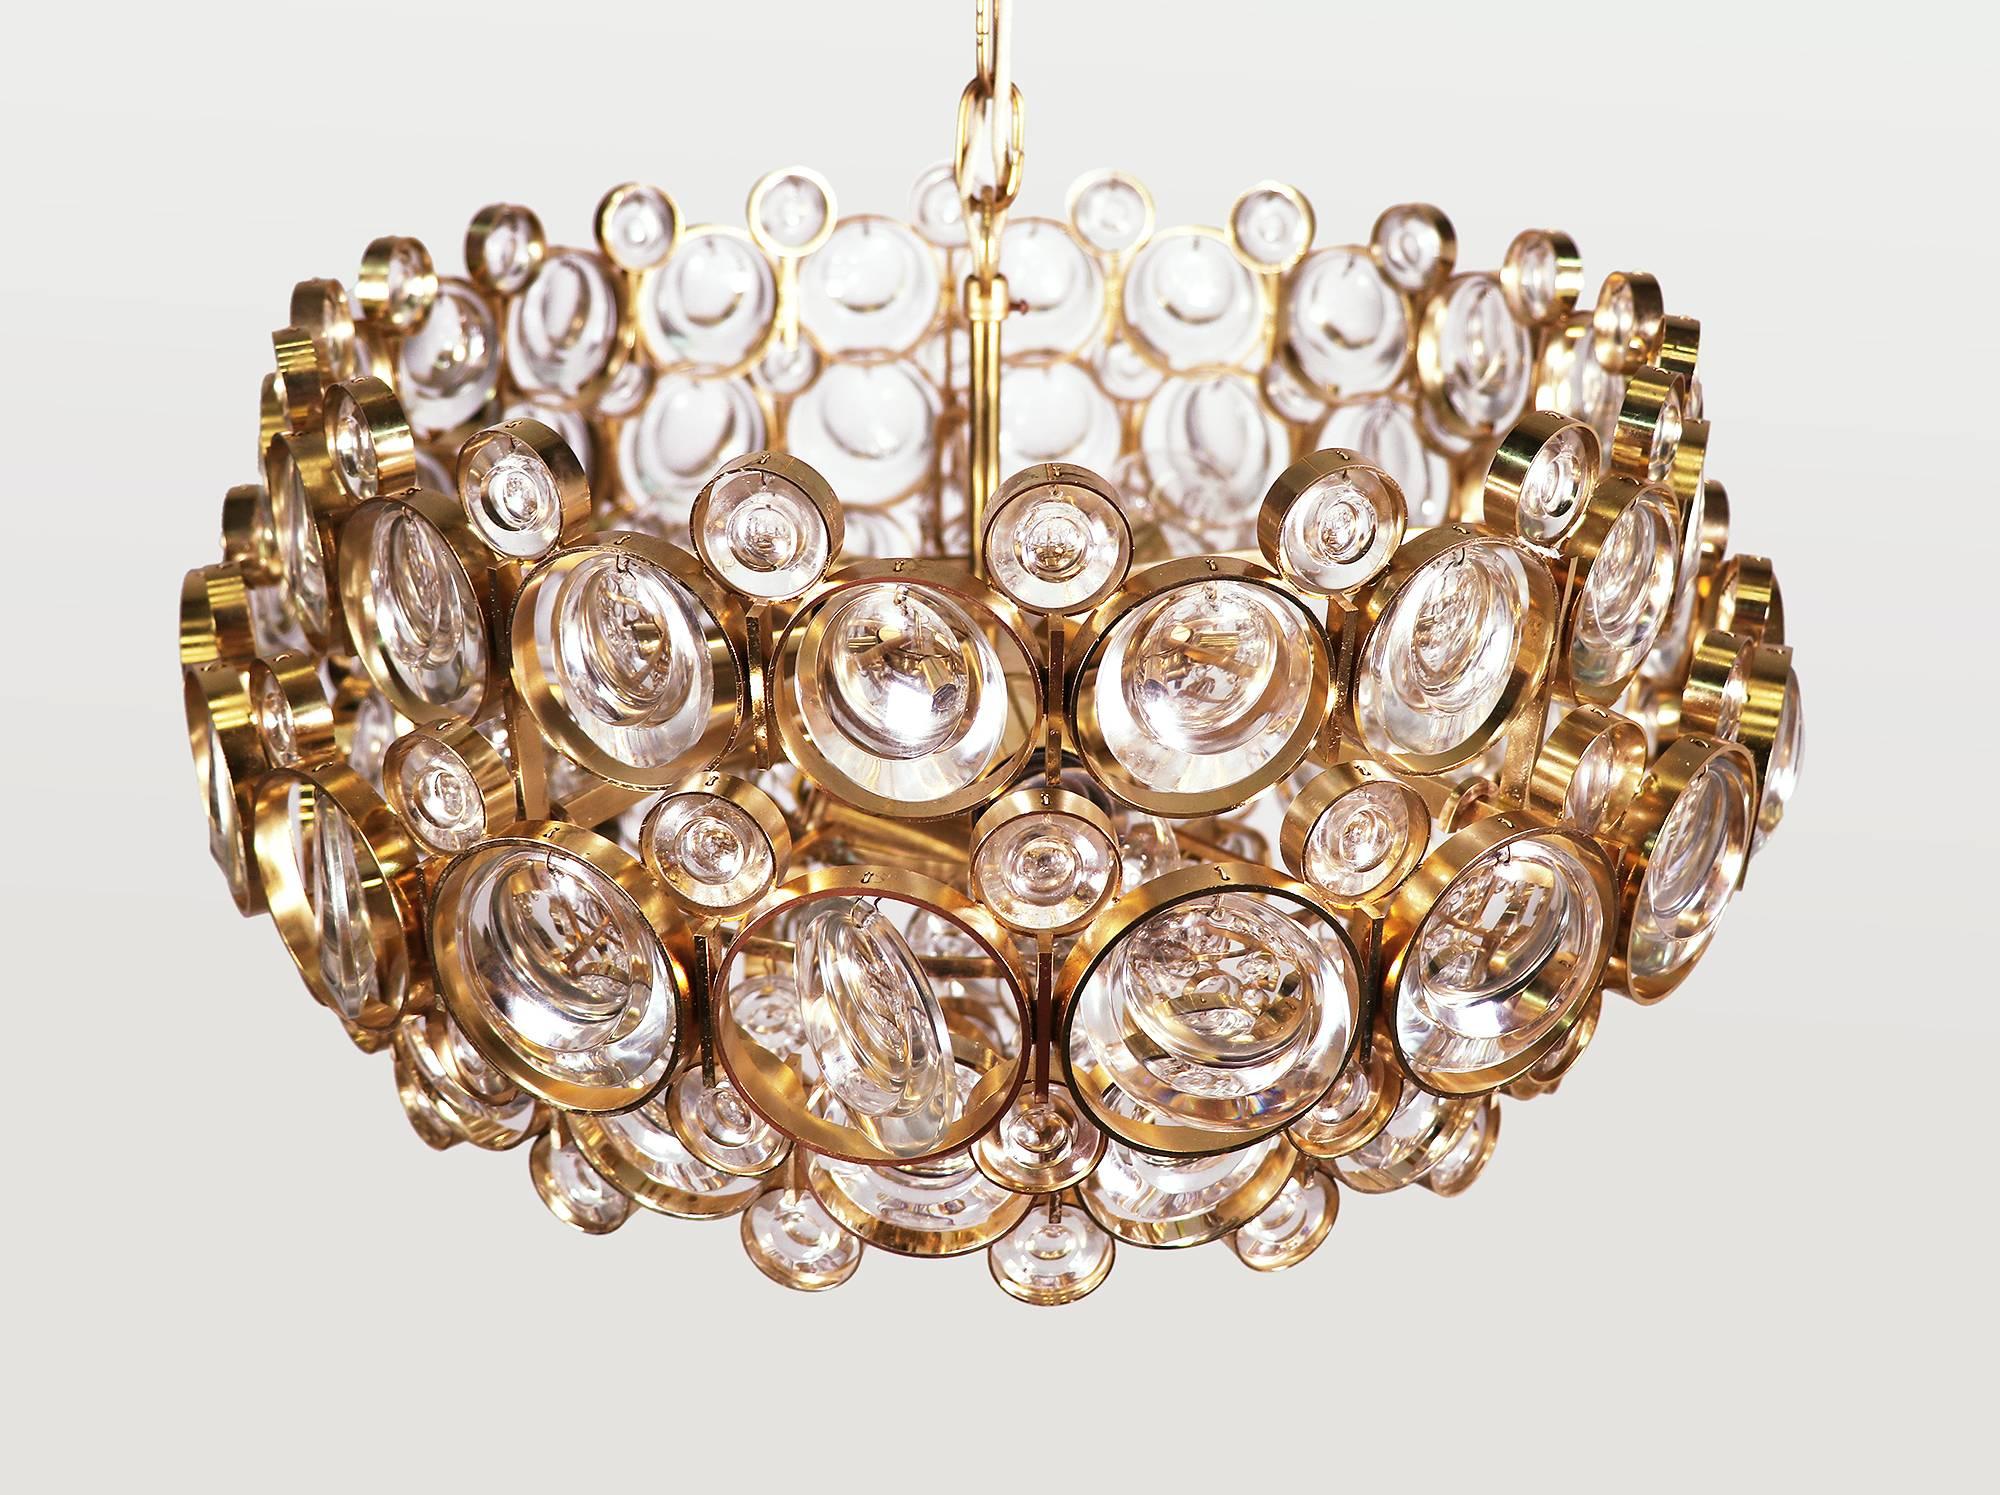 Glamorous multi-tiered bubble chandelier is made of a 24-carat gold-plated brass frame with crystal prisms and gilt brass rings. Designed in the 1960s by Gaetano Sciolari. Manufactured by Palwa (Palme & Walter), Germany in the 1960s. 

Design: